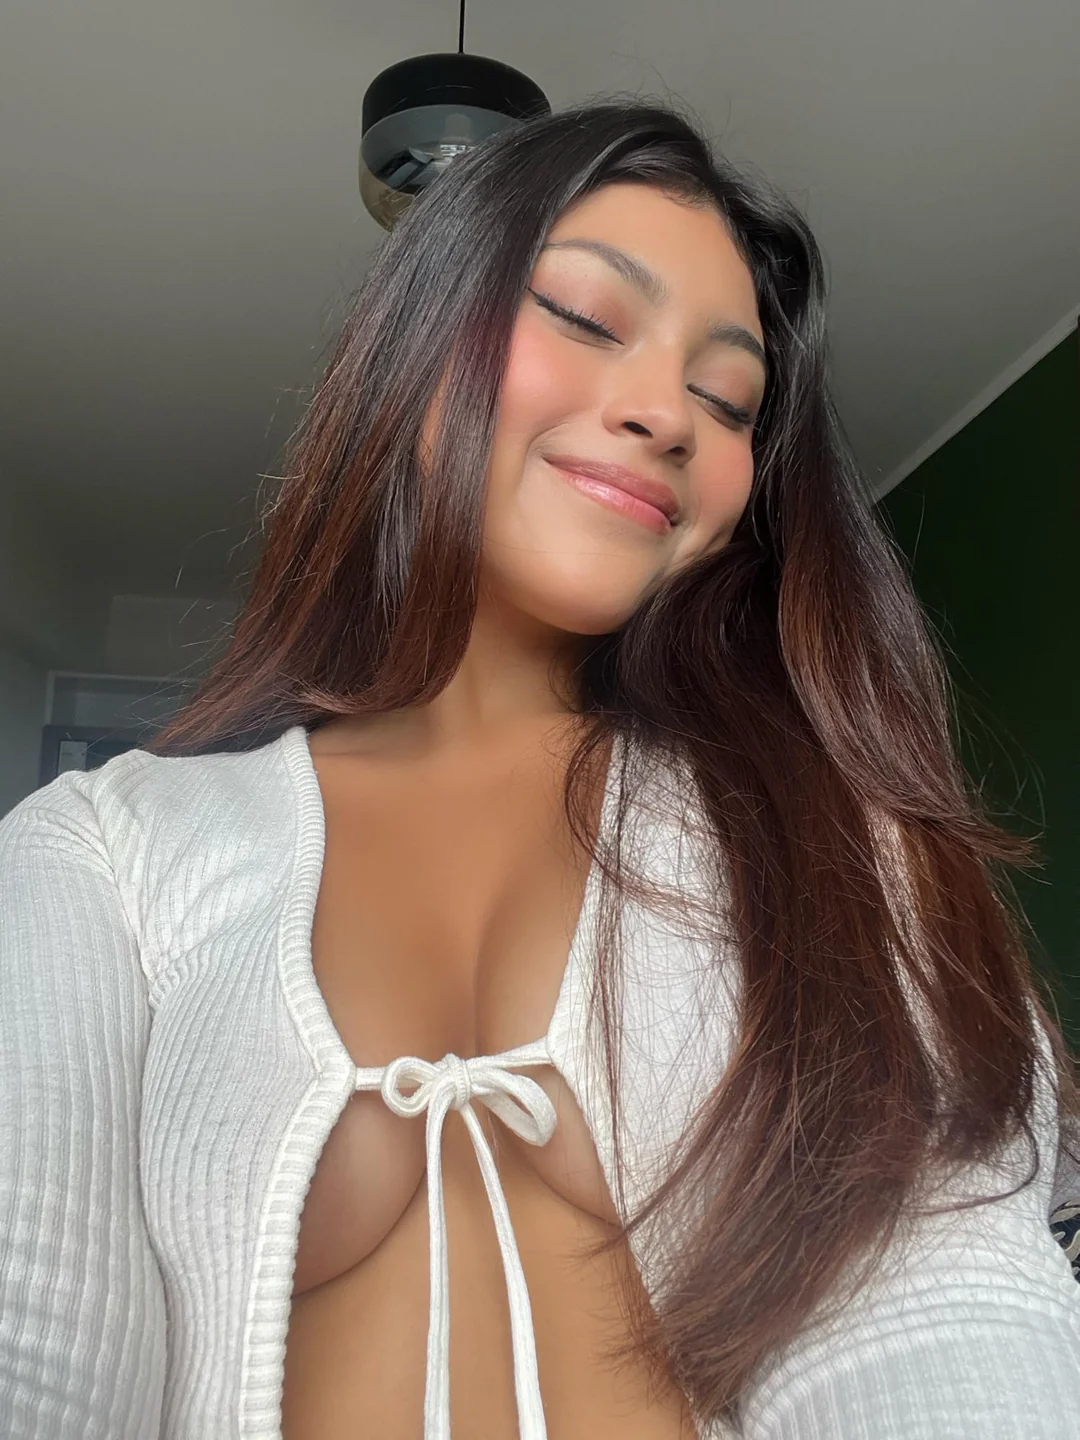 AlexandraBoo showing her gorgeous tits through white outfit